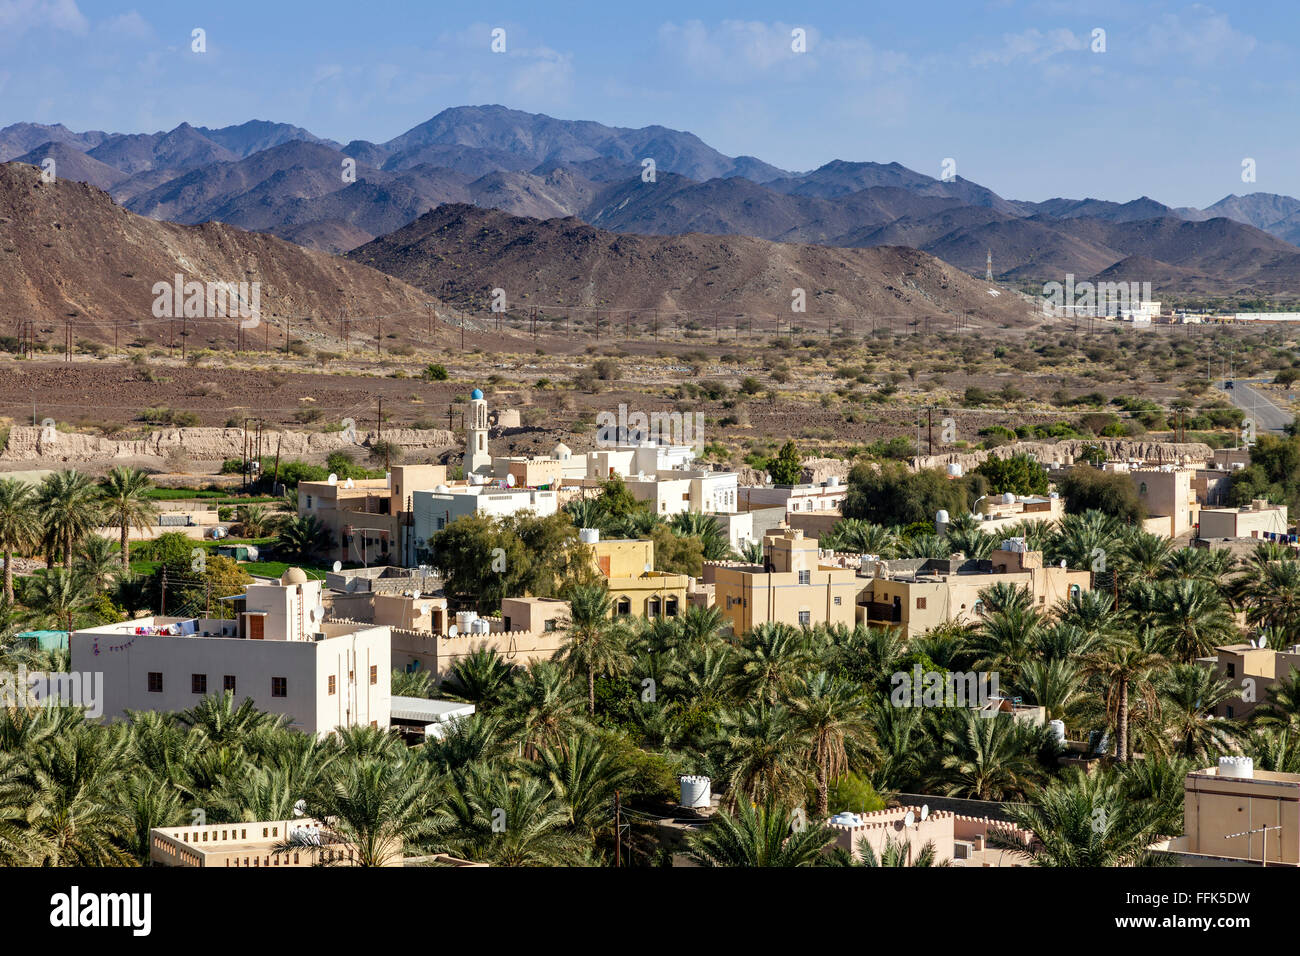 The Town Of Bahla Viewed From The Fort, Ad Dakhiliyah Region; Oman Stock Photo